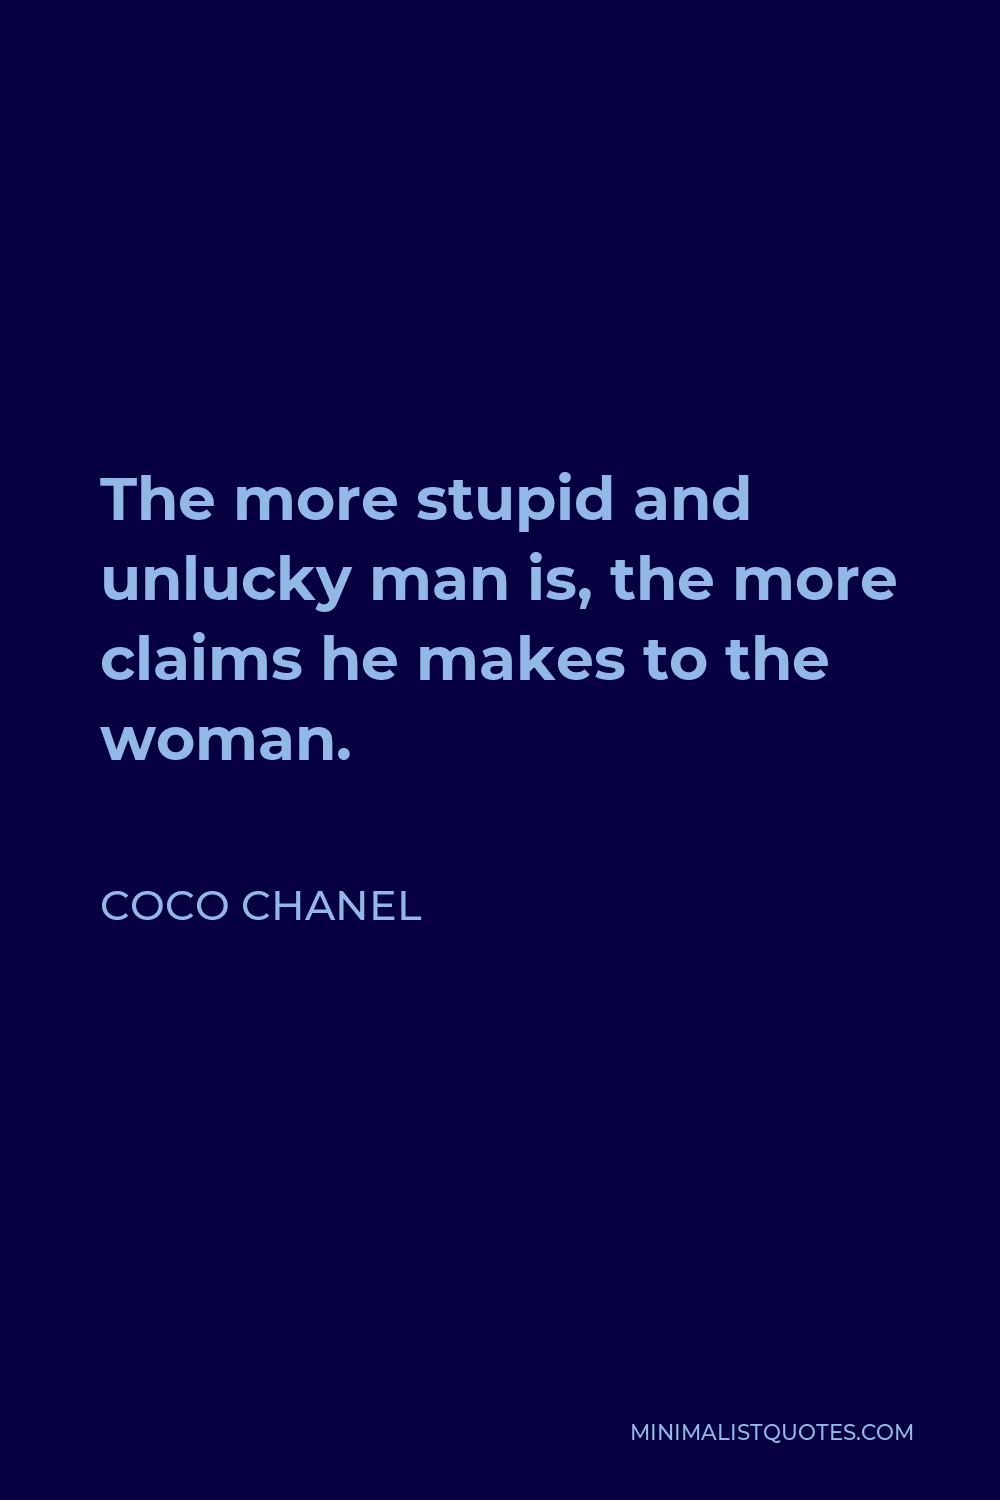 Coco Chanel Quote - The more stupid and unlucky man is, the more claims he makes to the woman.